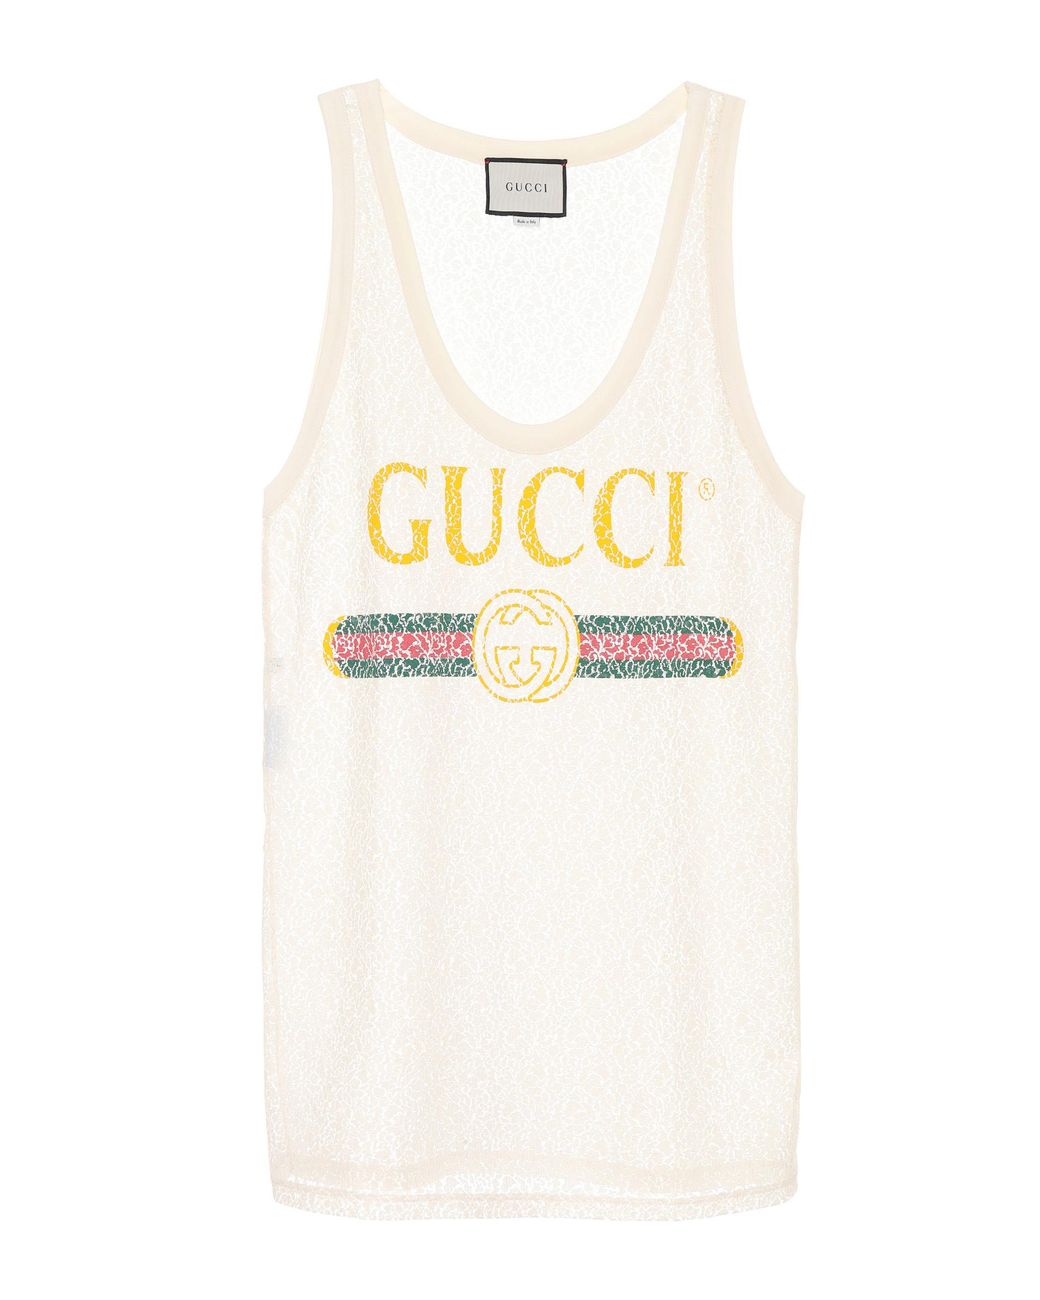 Gucci Printed Lace Tank Top in White | Lyst